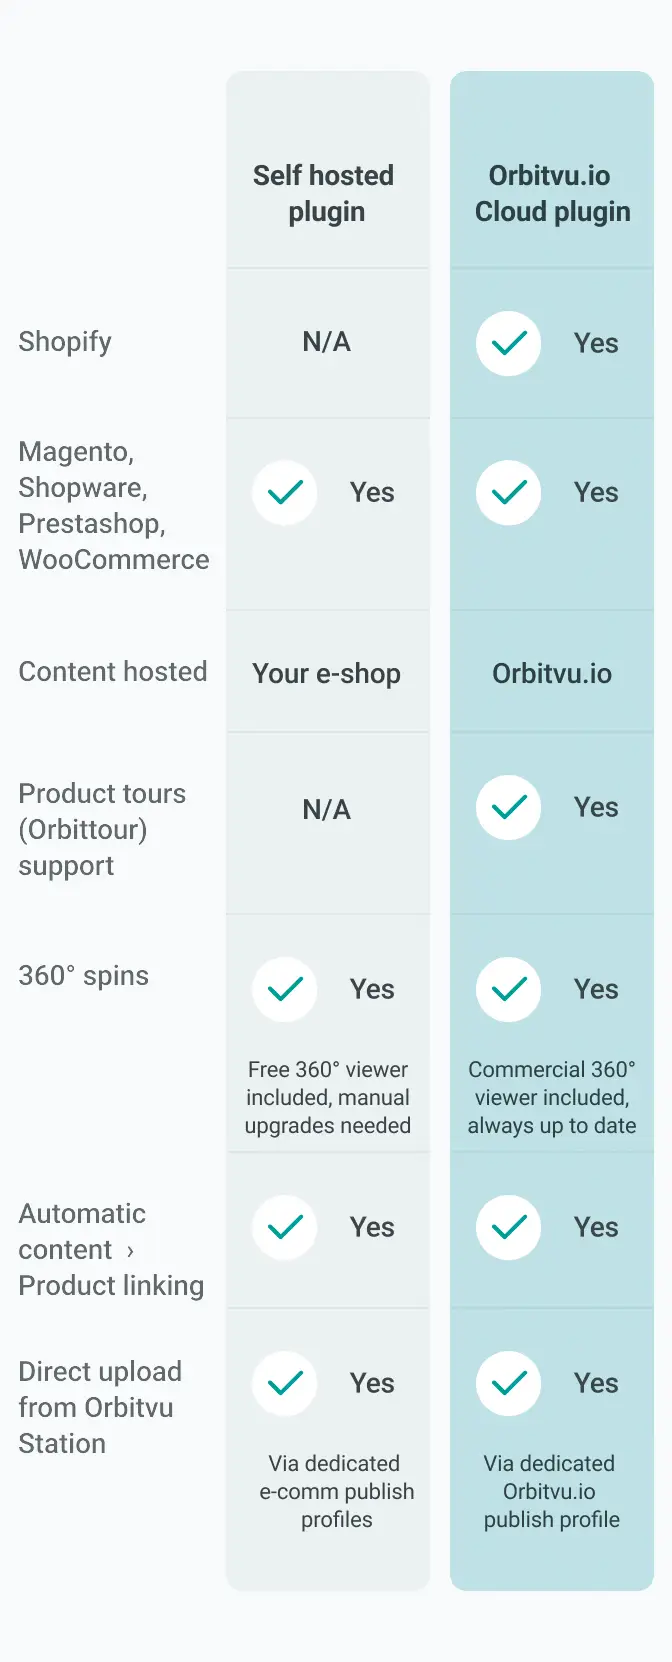 Learn the difference between self hosted and Orbitvu.io cloud plugins